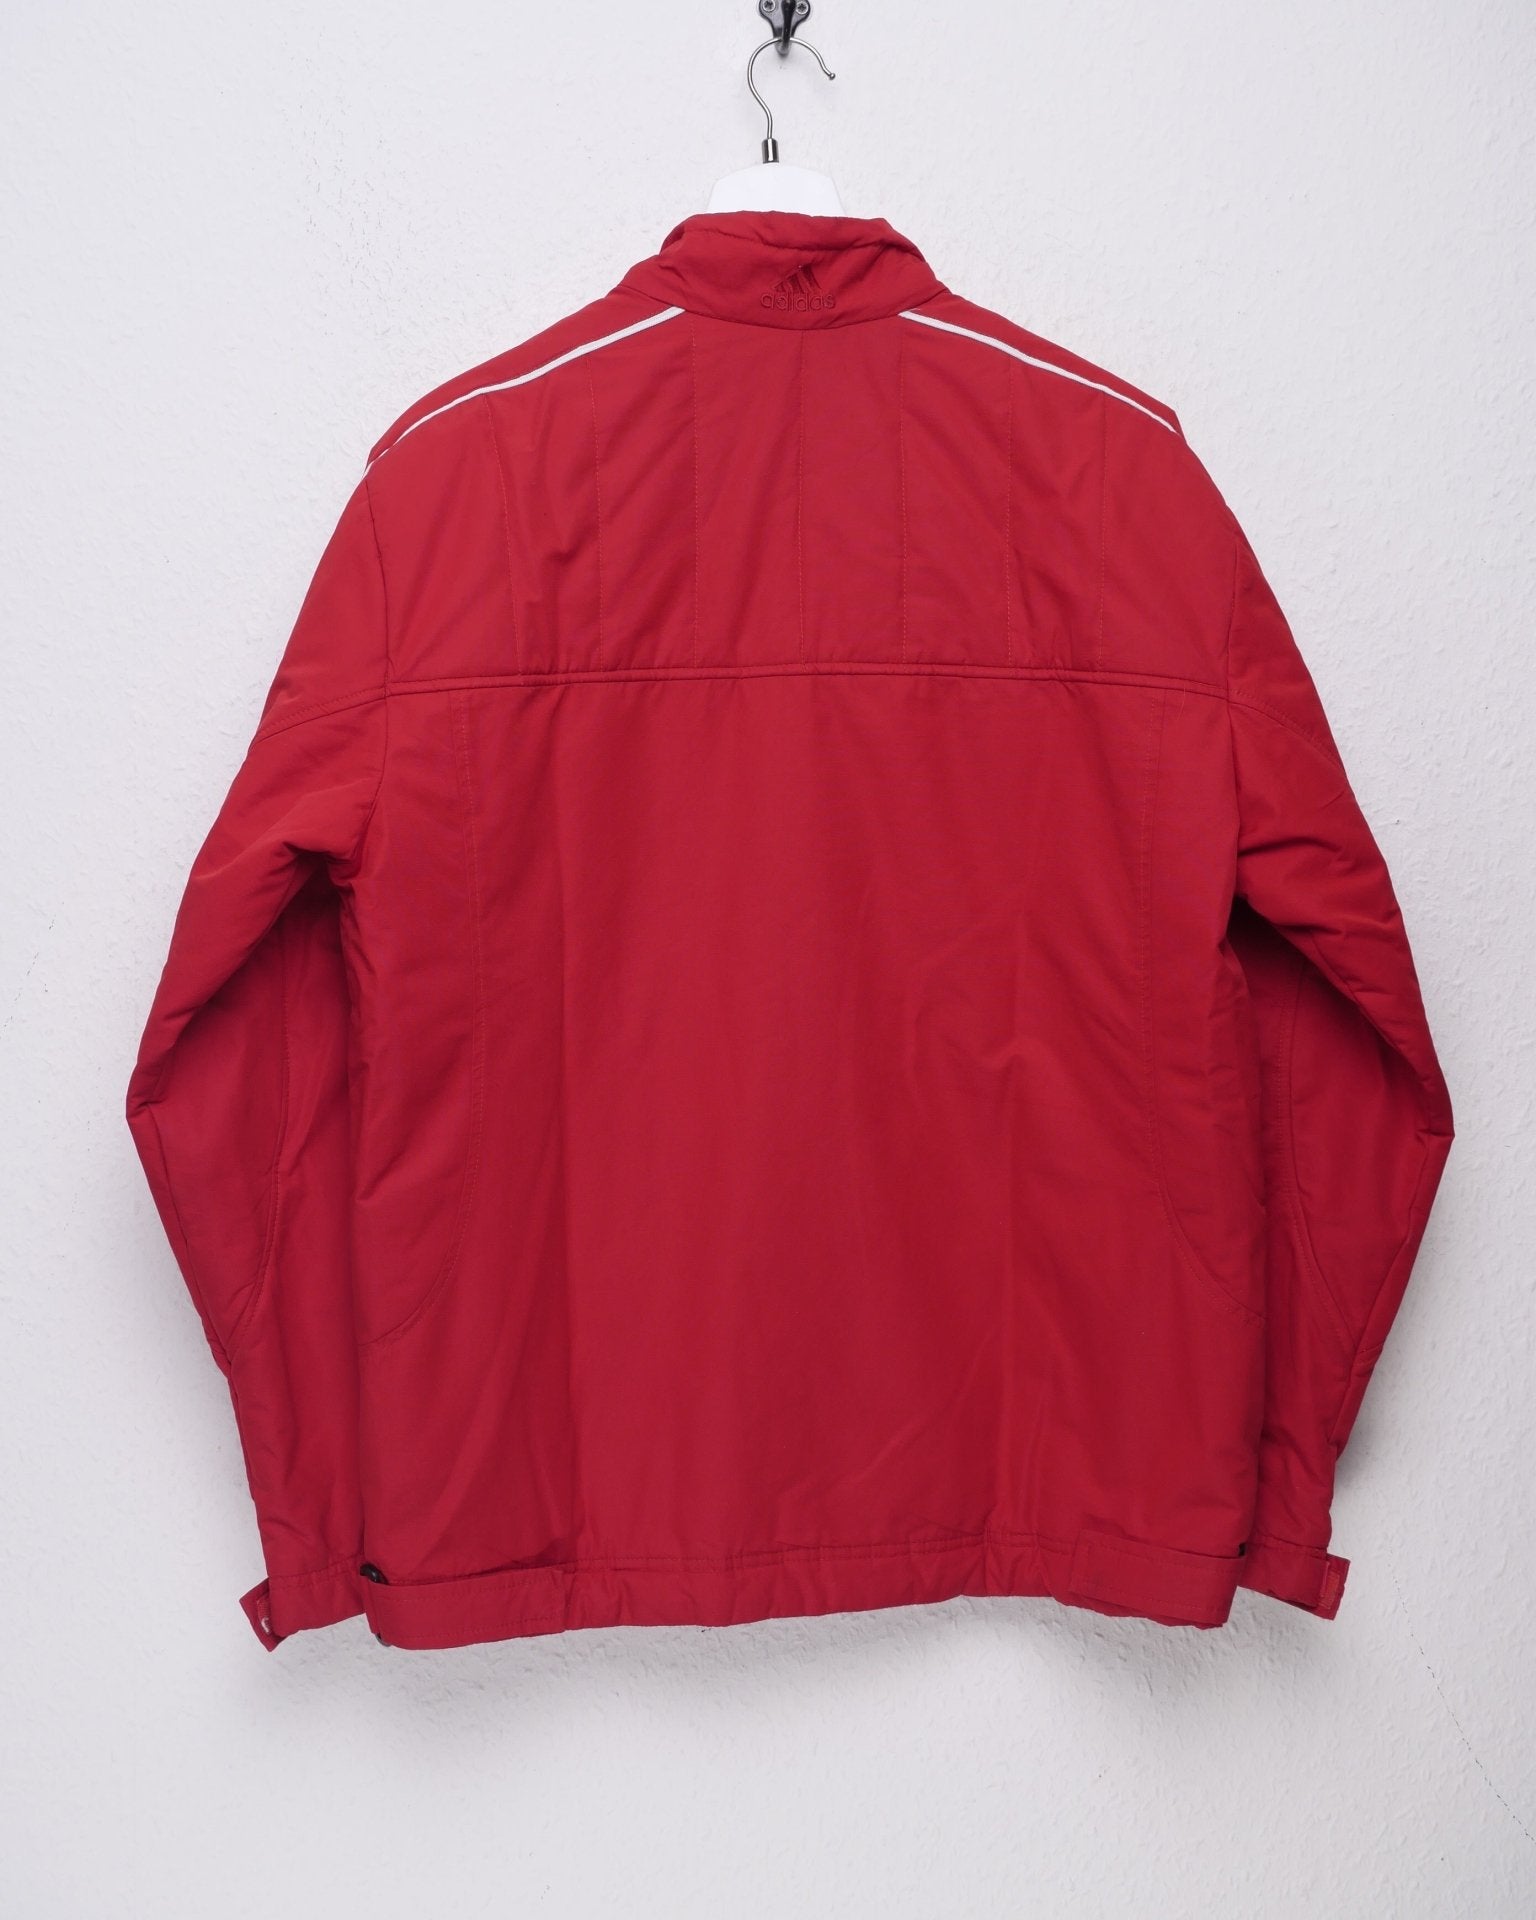 Adidas embroidered Spellout red thick Wind Jacket - Peeces